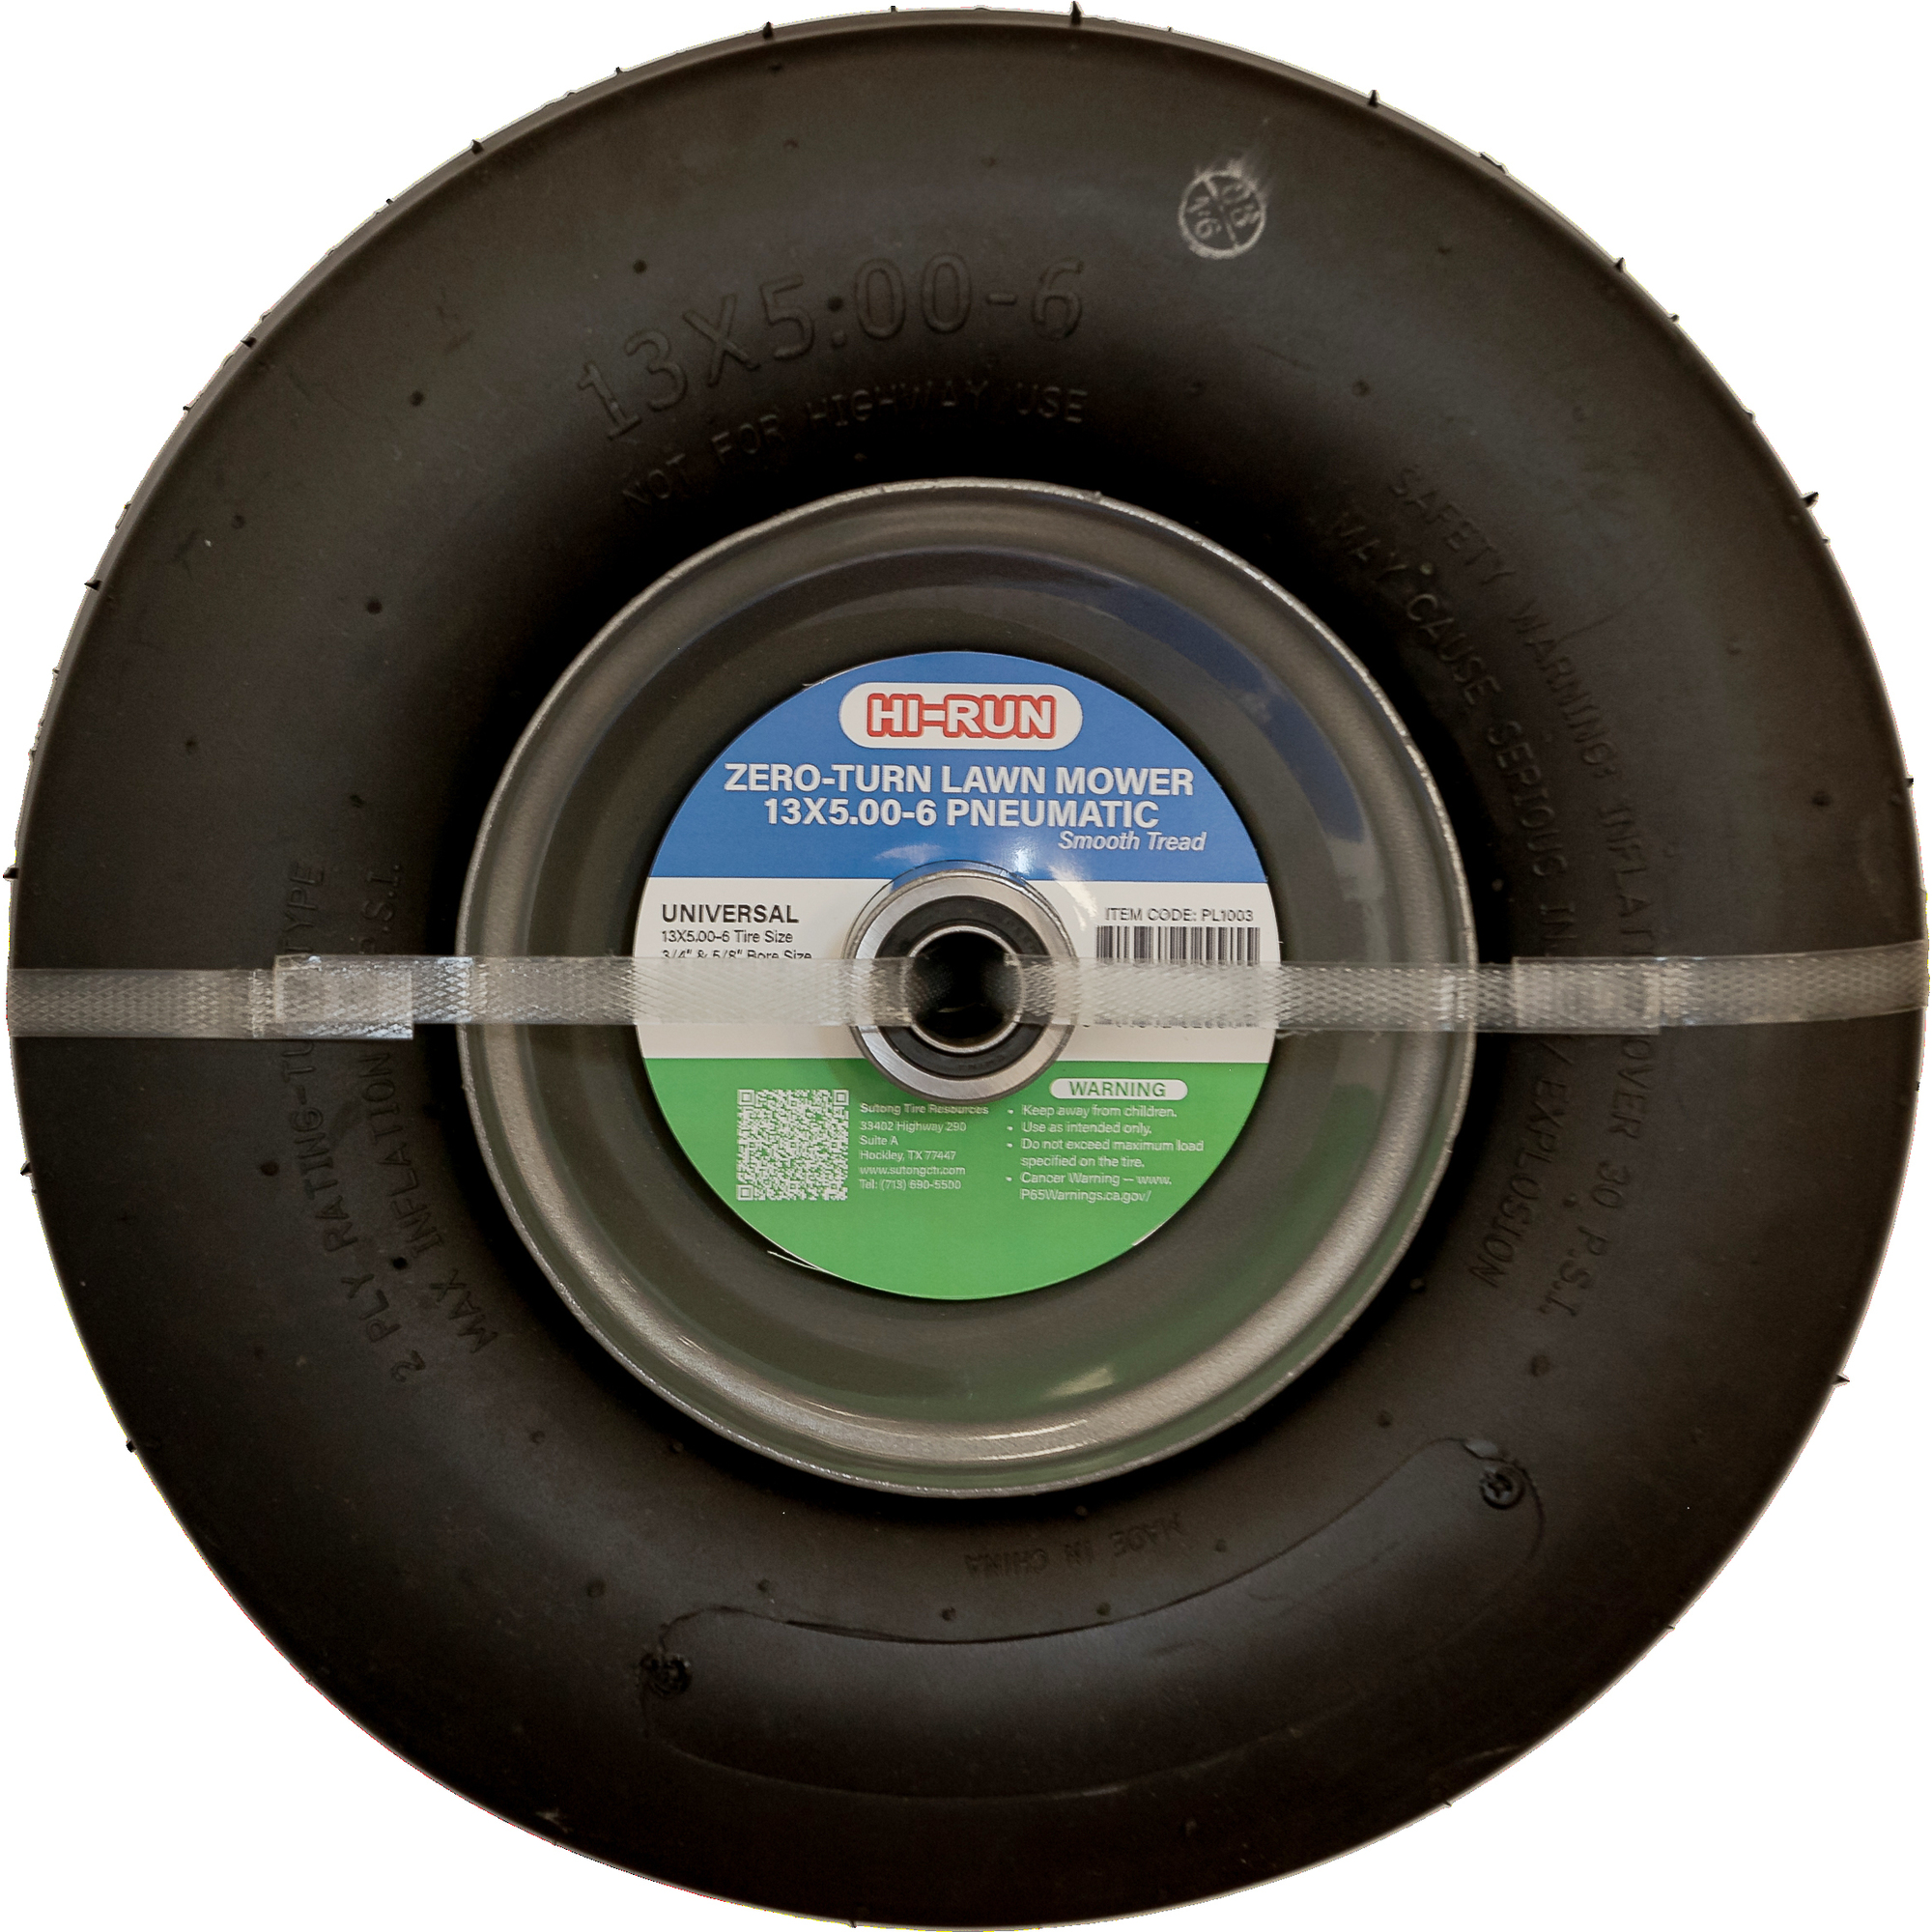 Universal Pneumatic Tire/Wheel with Kits, 5/8Inch 3/4Inch ID, Tire Size 13X5-6, Load Range Rating A, Model - HI-RUN PL1003